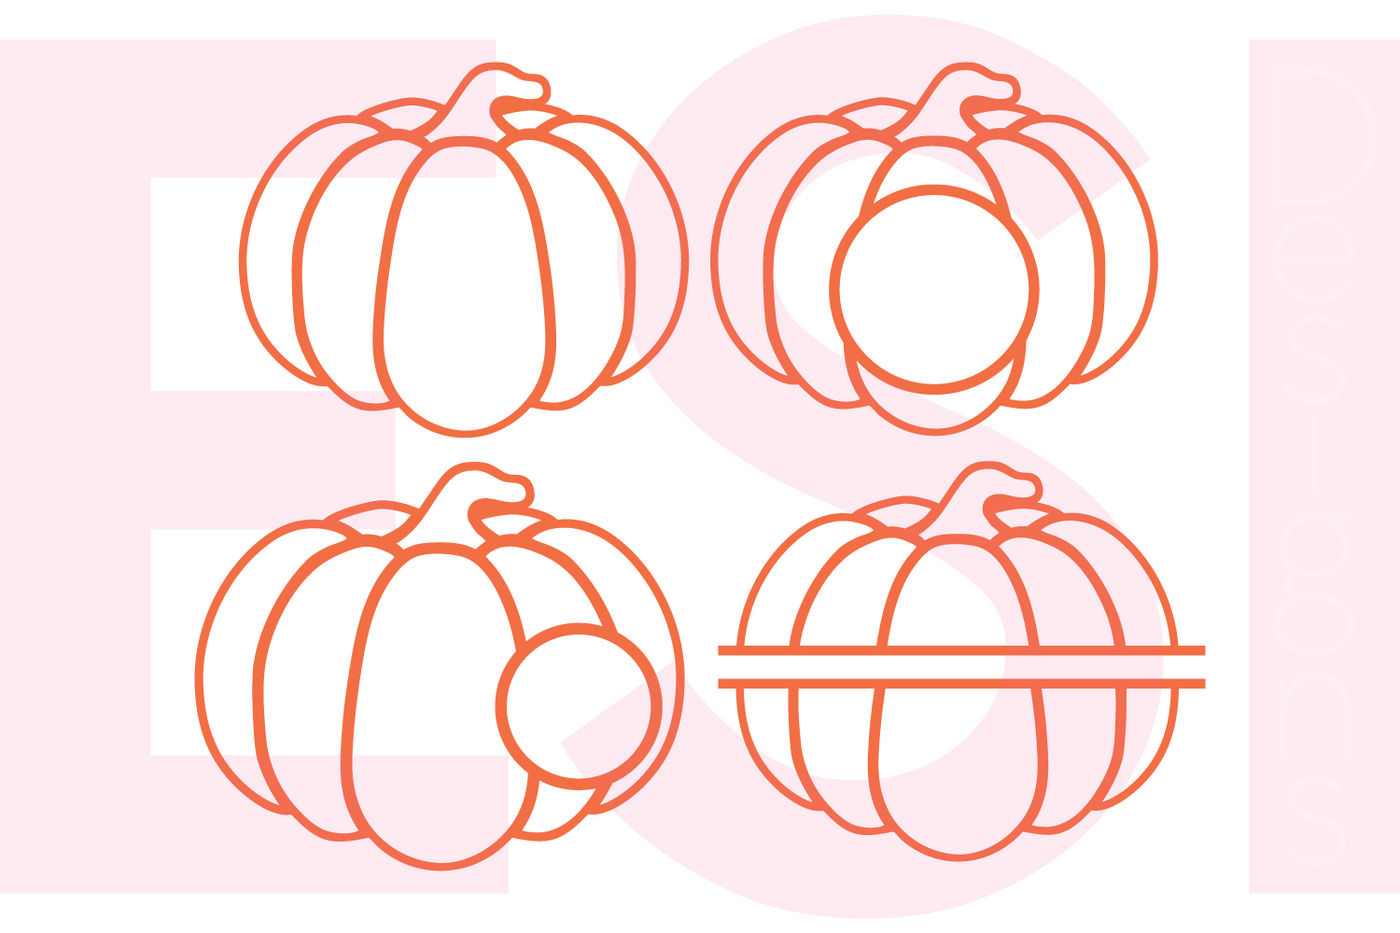 Download Pumpkin Outline Designs And Monogram Set Svg Dxf Eps Png Cutting Files By Esi Designs Thehungryjpeg Com